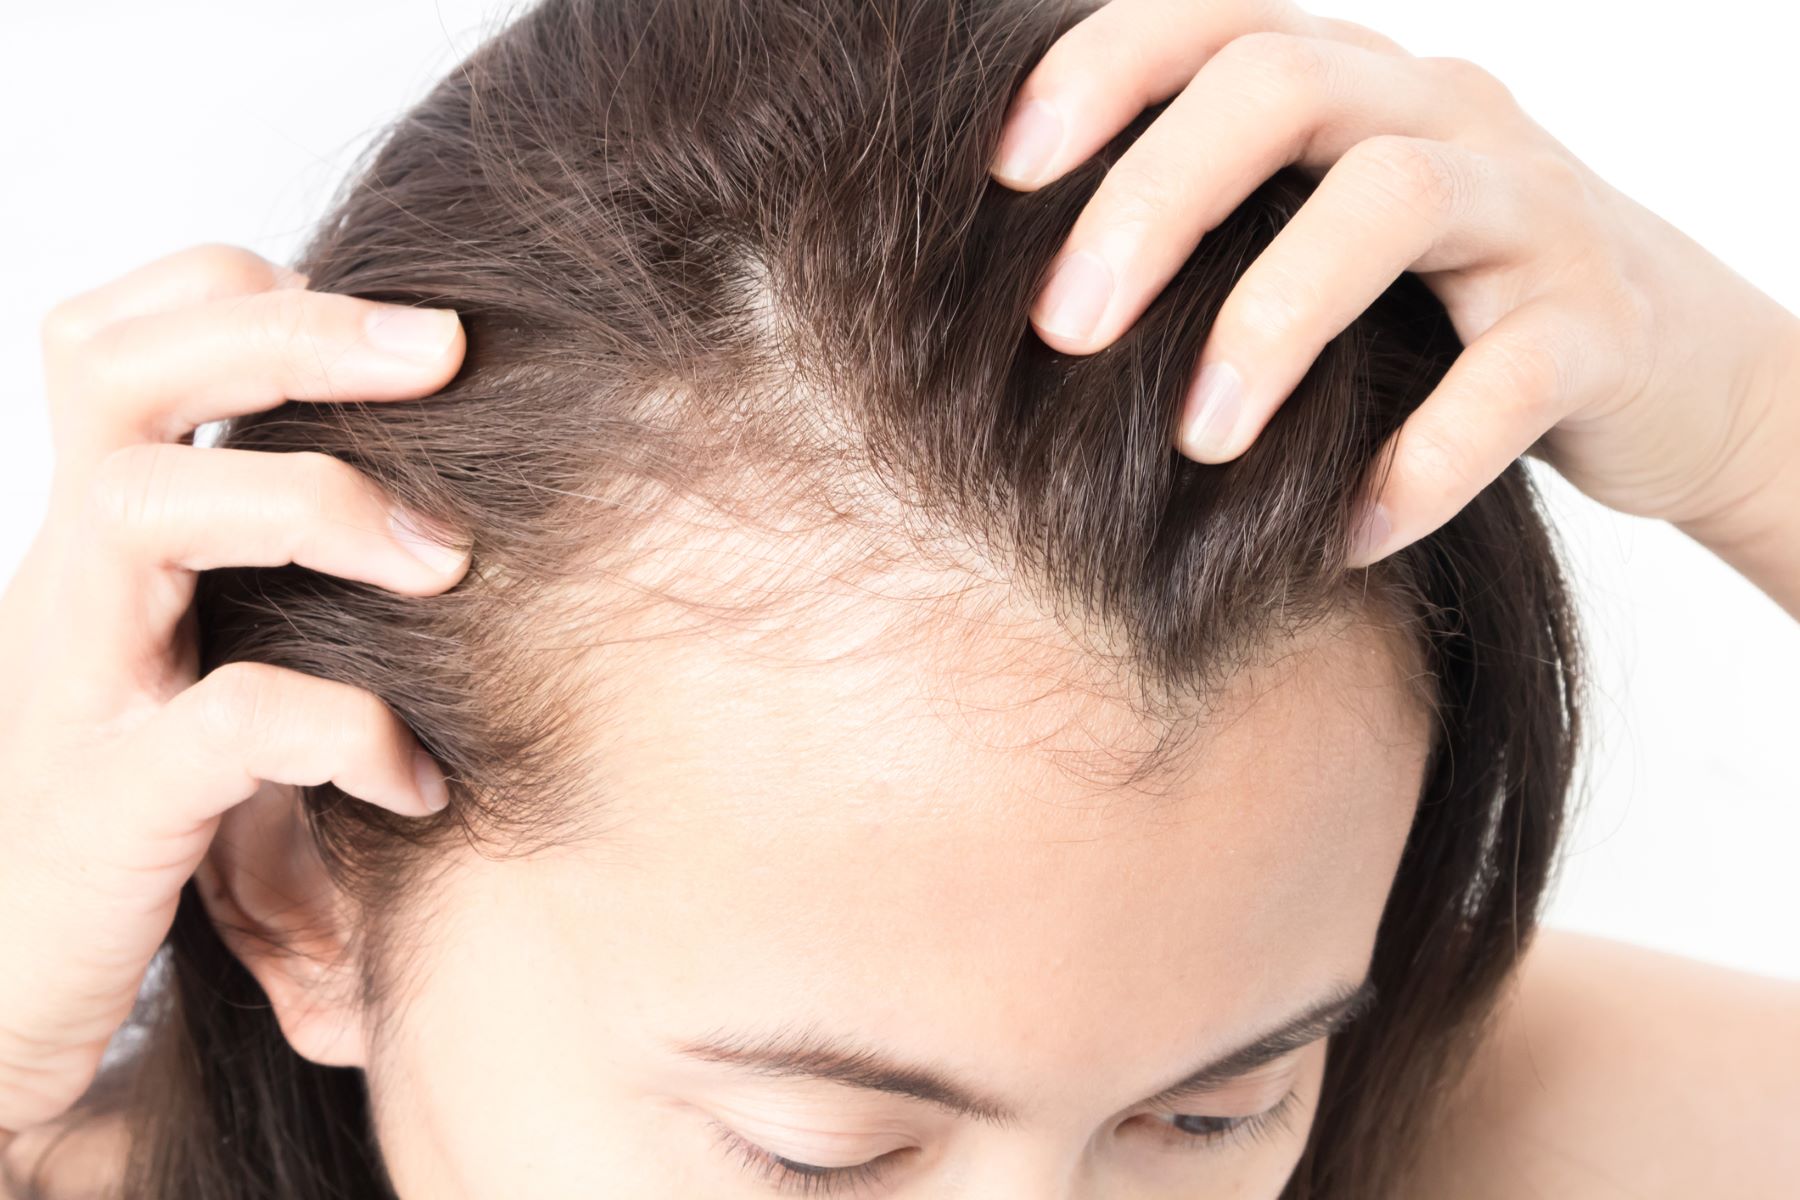 Traction alopecia: Causes, treatment, and prevention